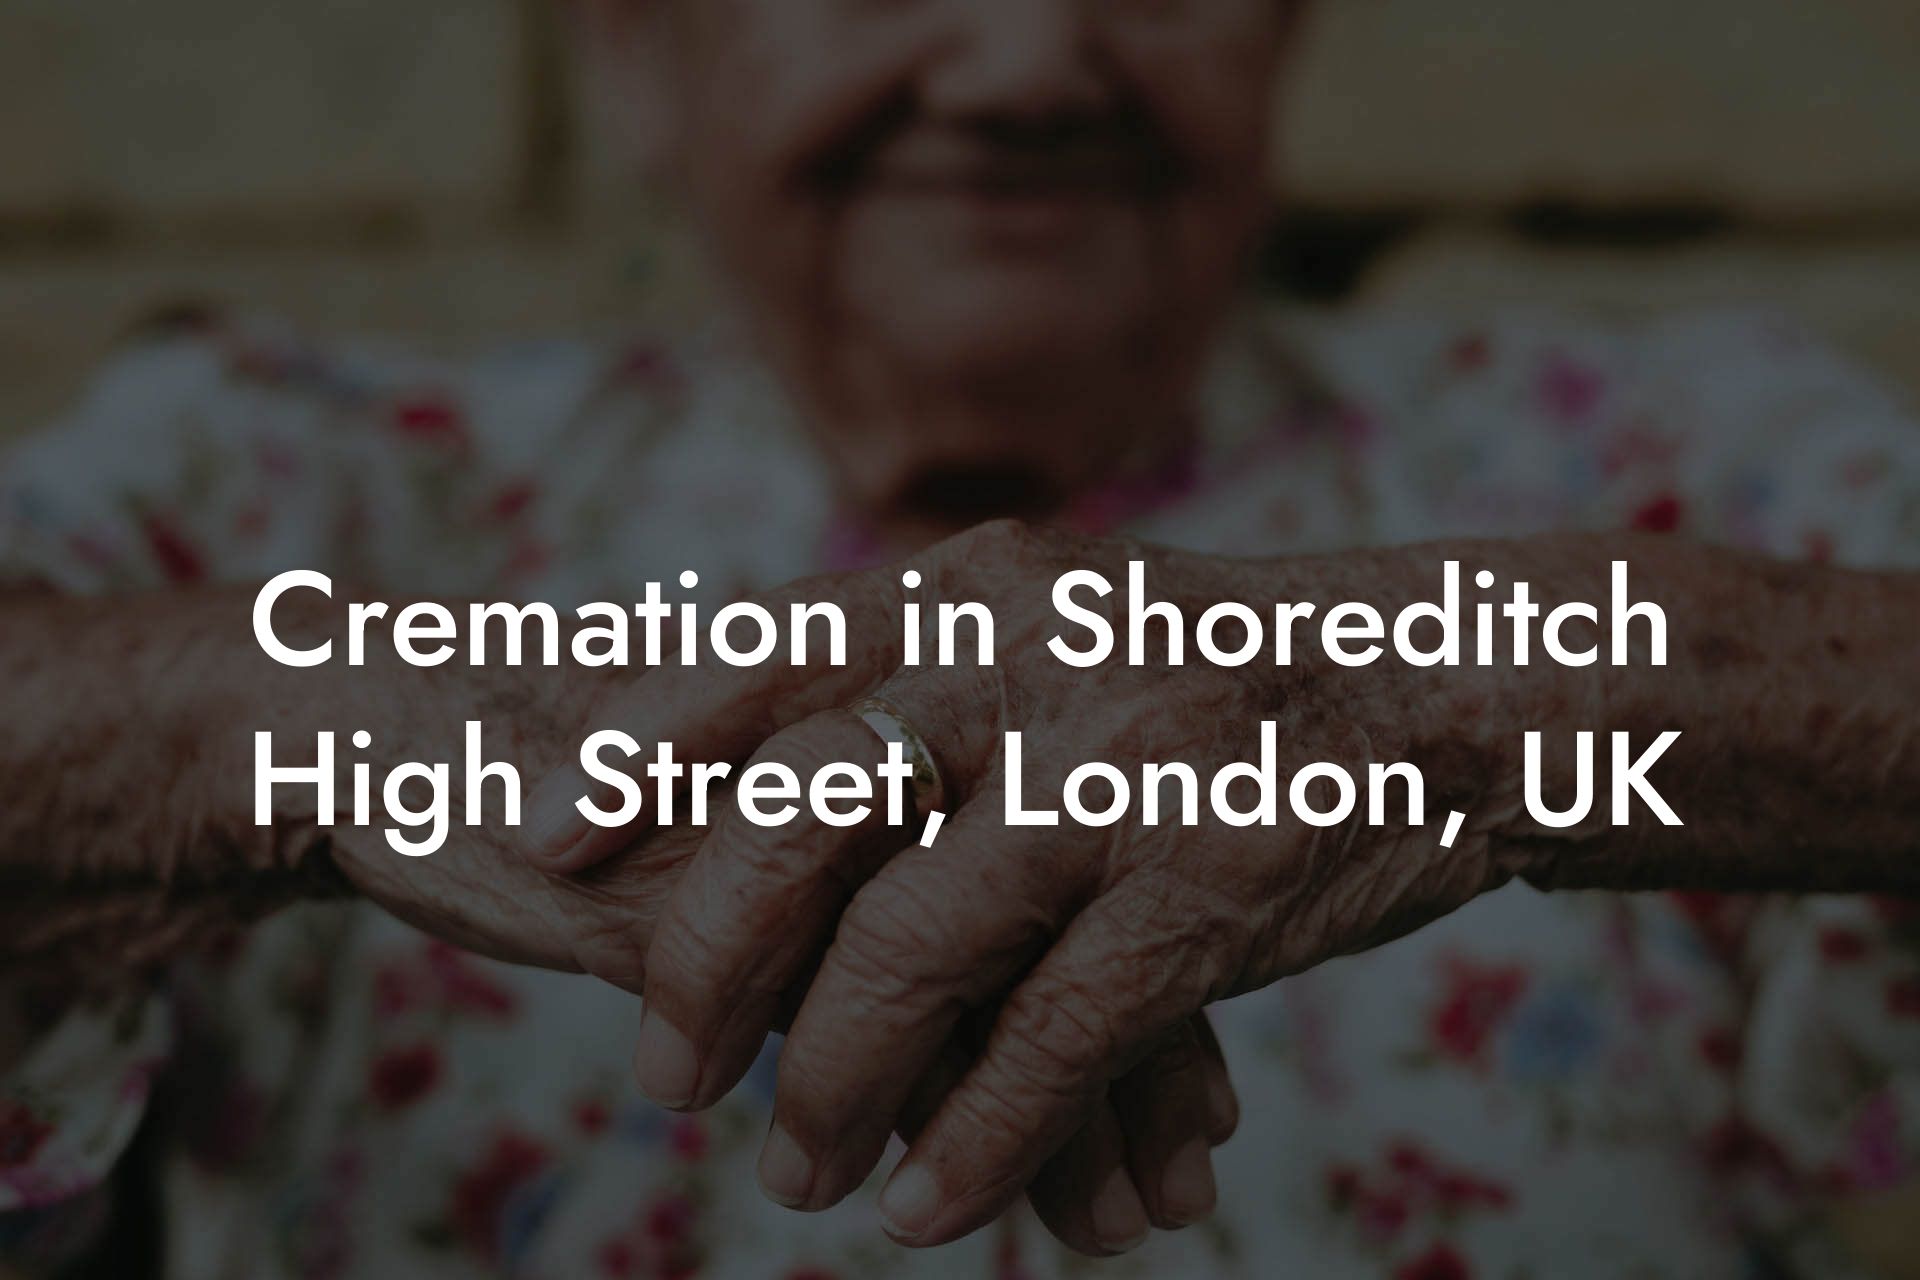 Cremation in Shoreditch High Street, London, UK